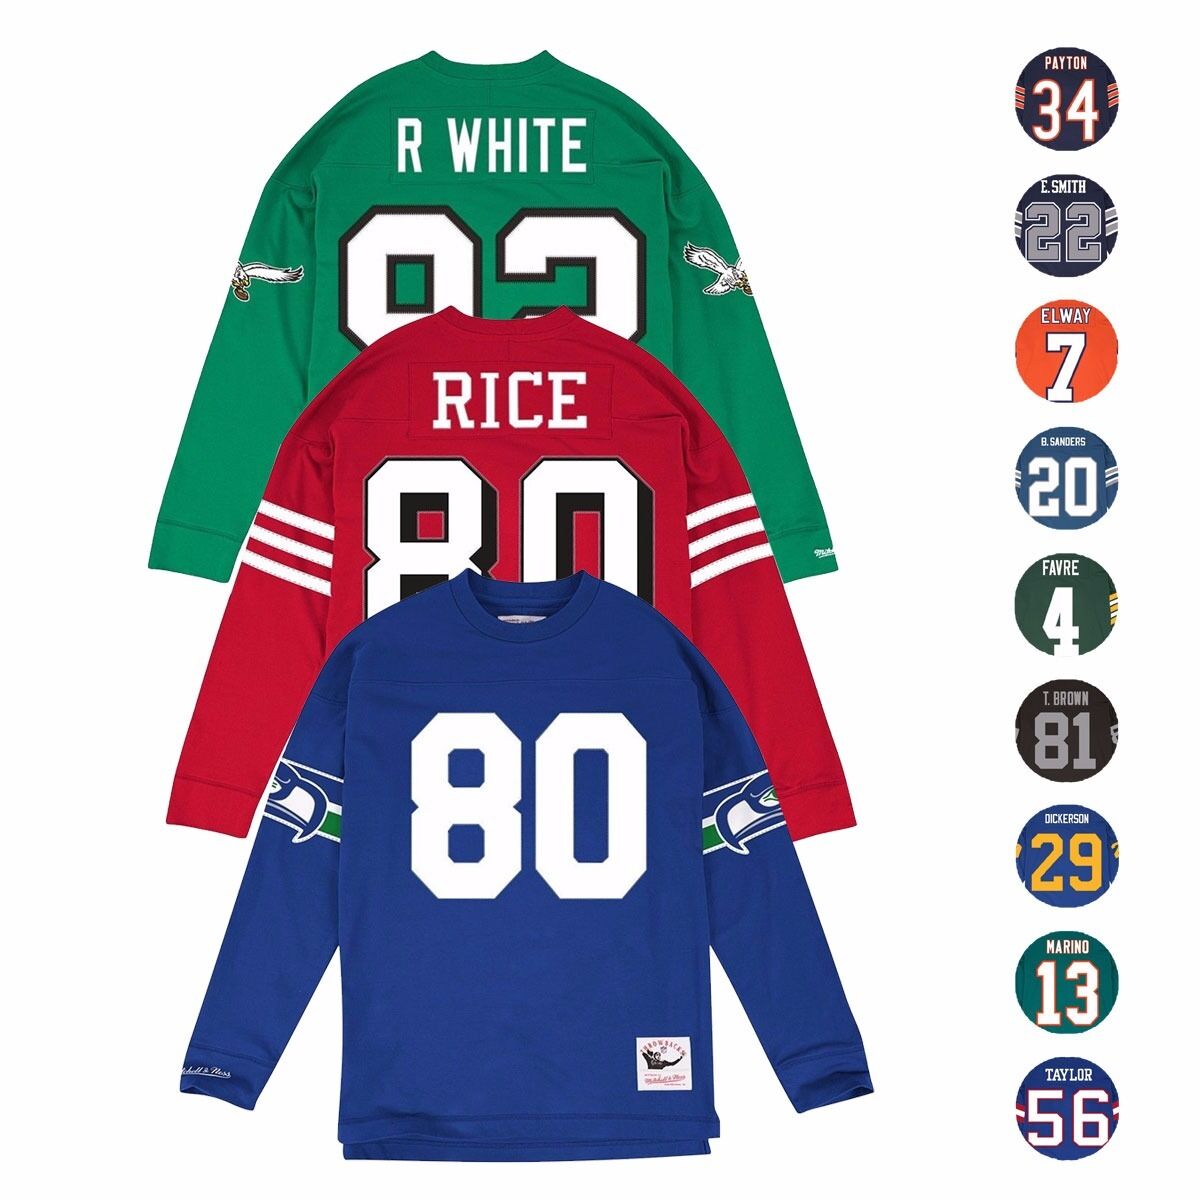 NFL HOF LEGENDS Long Sleeve MITCHELL & NESS Jersey Inspired Knit Top Collection Mitchell & Ness